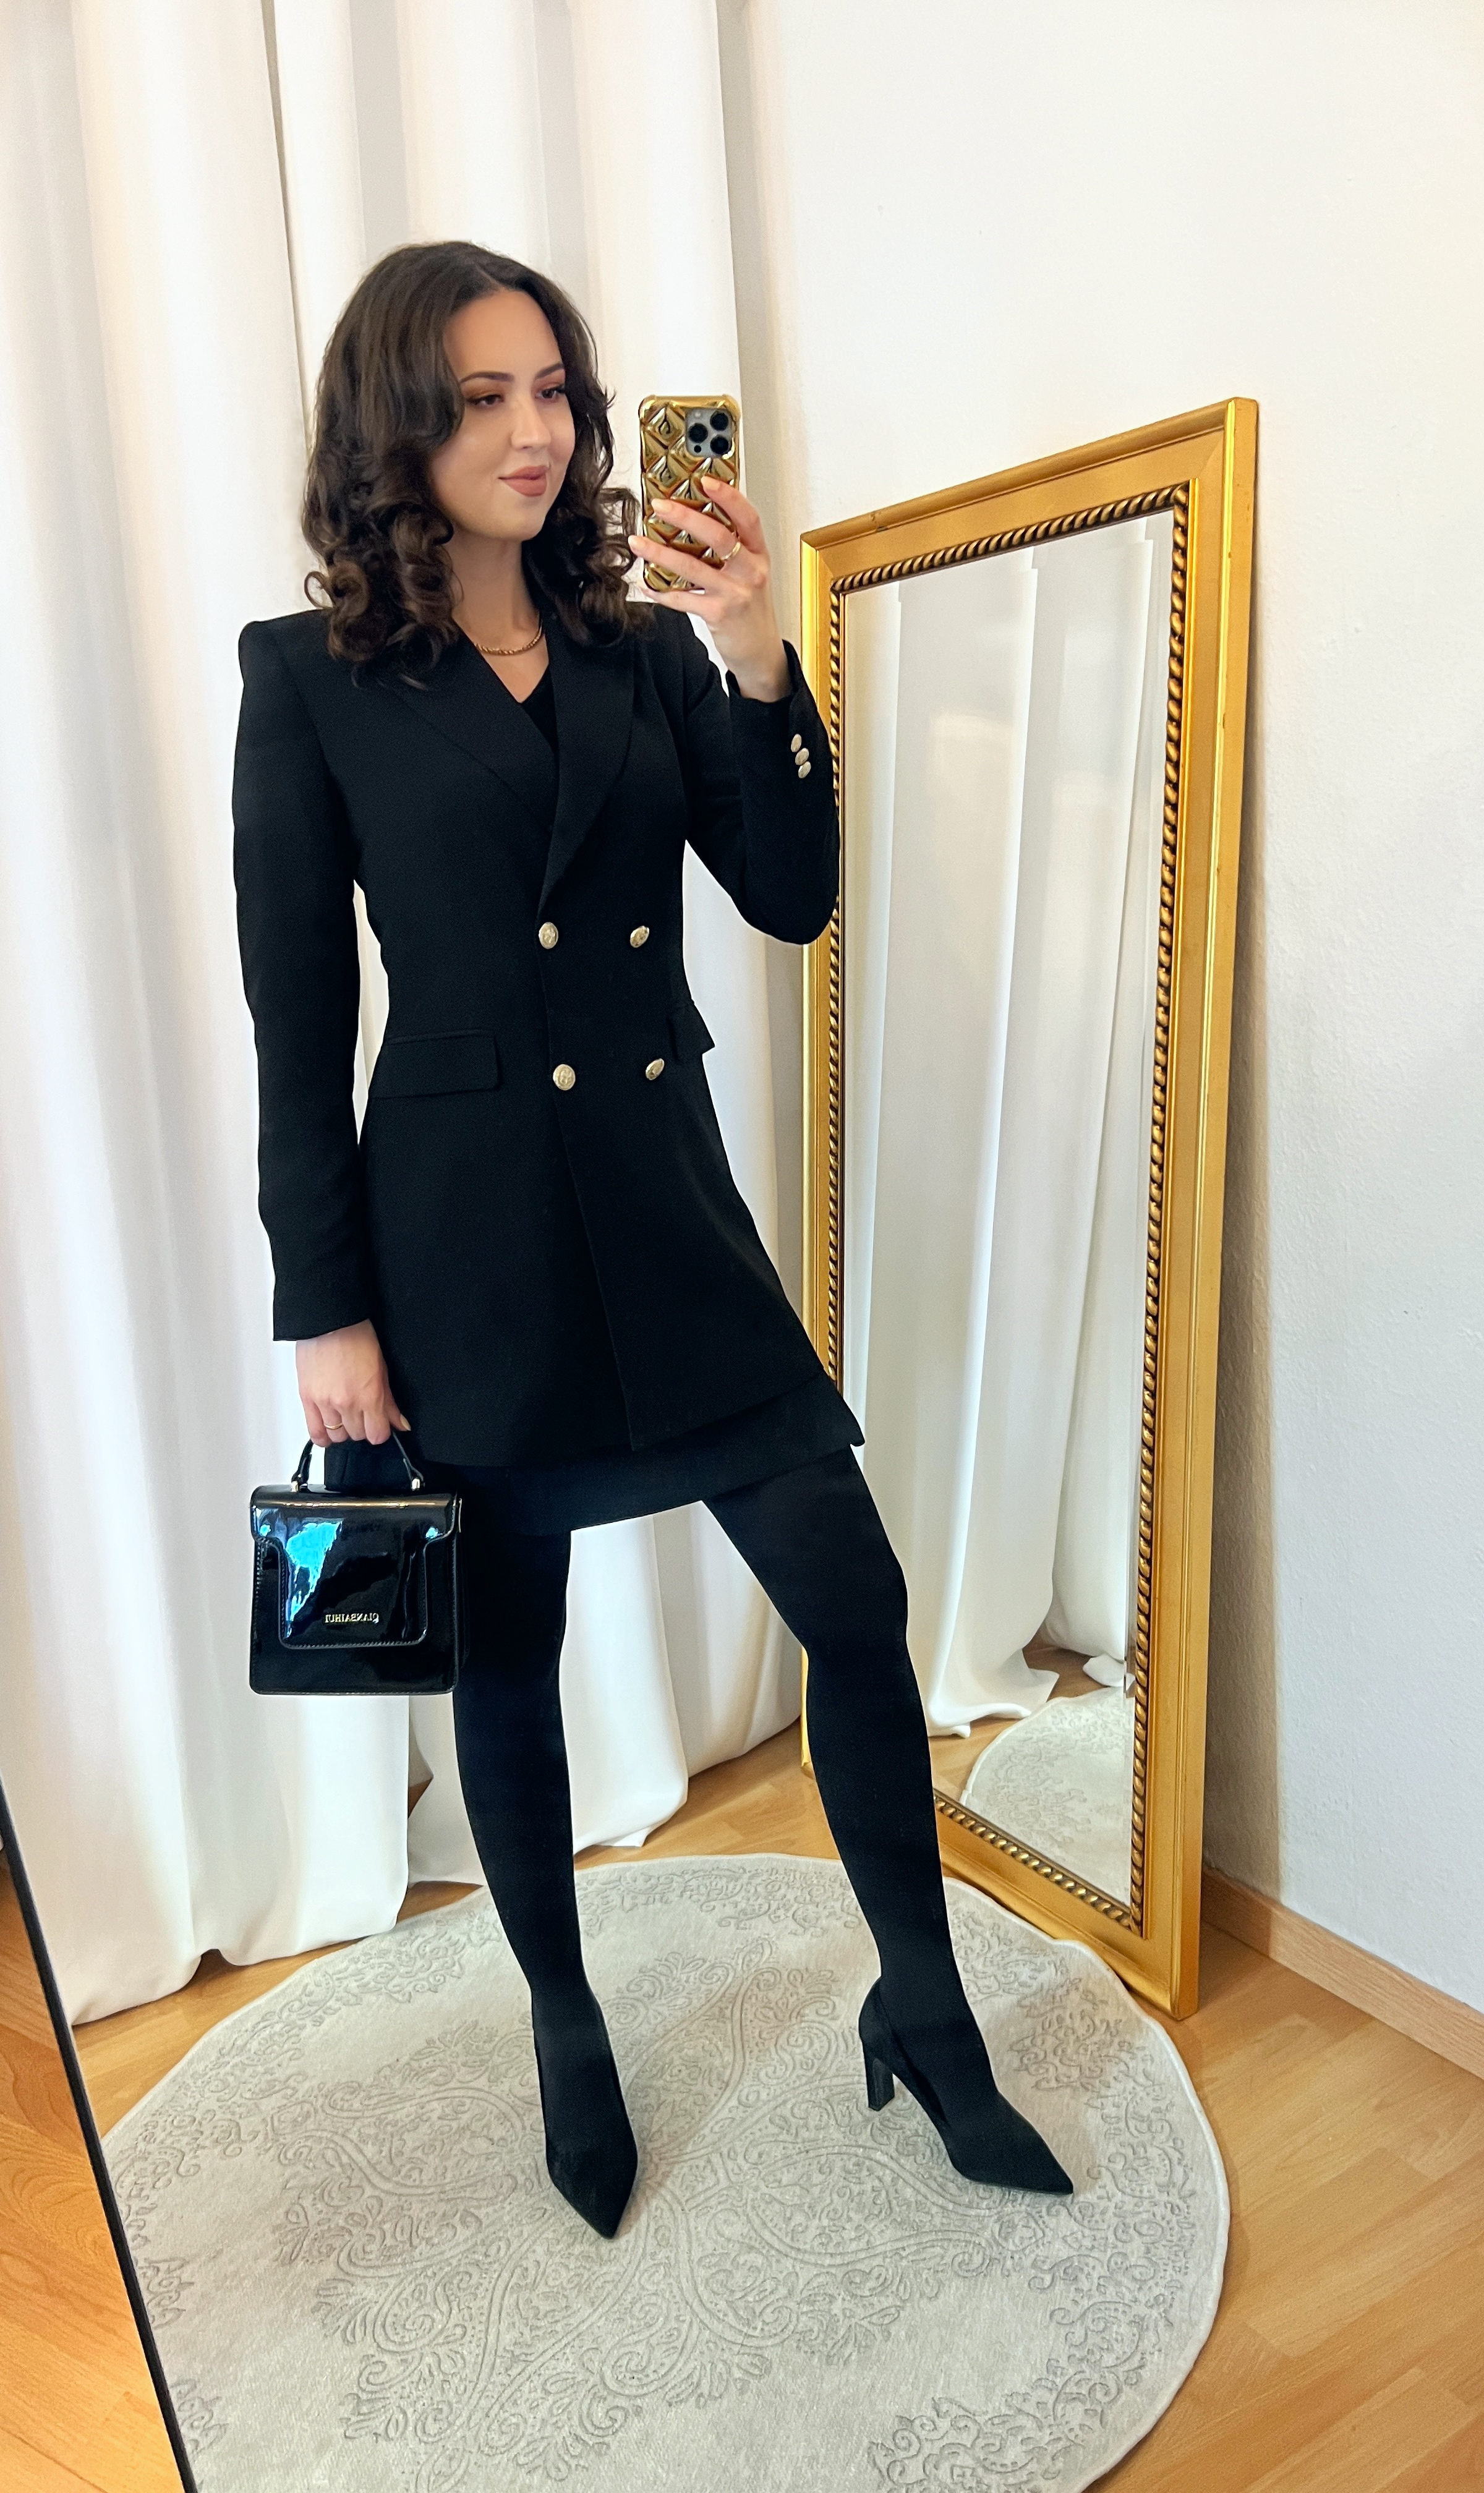 Black Blazer and Black Skirt Outfit with Opaque Black Tights and Pumps